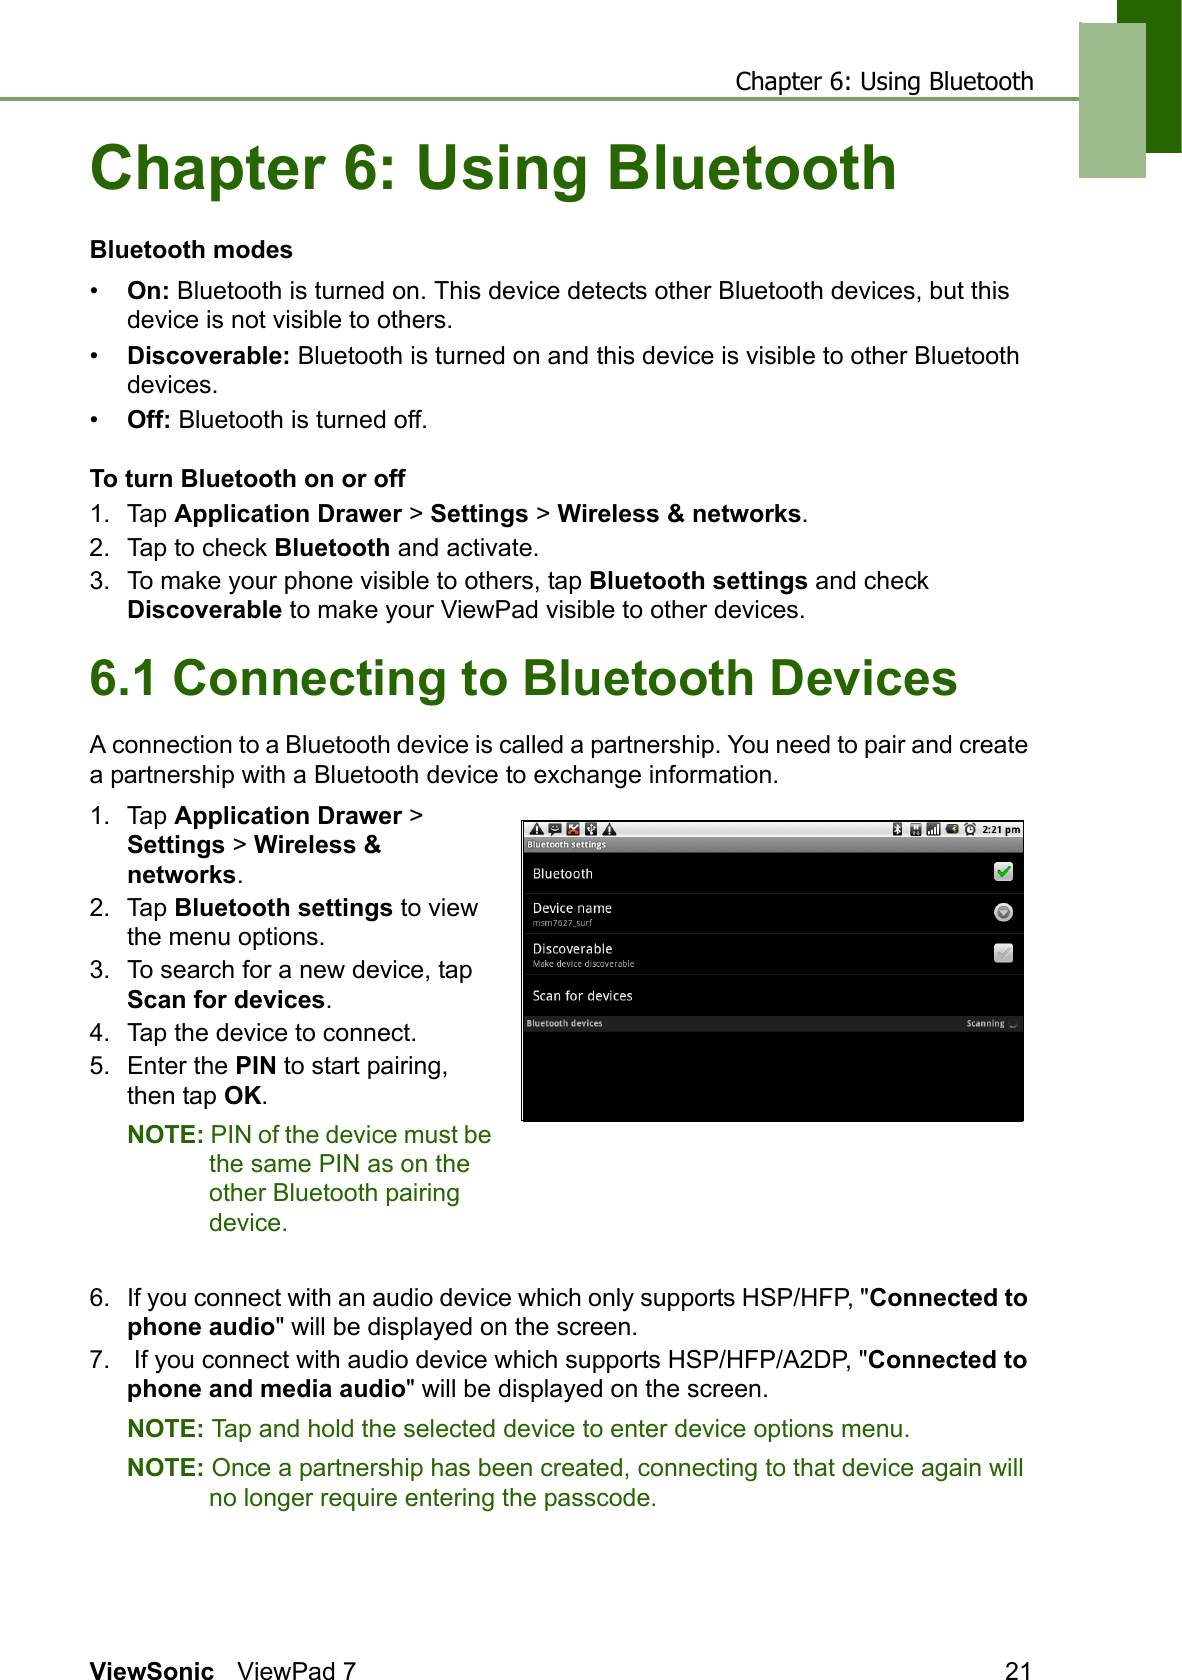 Chapter 6: Using BluetoothViewSonic ViewPad 7 21Chapter 6: Using BluetoothBluetooth modes•On: Bluetooth is turned on. This device detects other Bluetooth devices, but this device is not visible to others.•Discoverable: Bluetooth is turned on and this device is visible to other Bluetooth devices.•Off: Bluetooth is turned off.To turn Bluetooth on or off1. Tap Application Drawer &gt; Settings &gt; Wireless &amp; networks.2. Tap to check Bluetooth and activate.3. To make your phone visible to others, tap Bluetooth settings and check Discoverable to make your ViewPad visible to other devices.6.1 Connecting to Bluetooth DevicesA connection to a Bluetooth device is called a partnership. You need to pair and create a partnership with a Bluetooth device to exchange information.1. Tap Application Drawer &gt; Settings &gt; Wireless &amp; networks.2. Tap Bluetooth settings to view the menu options. 3. To search for a new device, tap Scan for devices.4. Tap the device to connect.5. Enter the PIN to start pairing, then tap OK.NOTE: PIN of the device must be the same PIN as on the other Bluetooth pairing device.6. If you connect with an audio device which only supports HSP/HFP, &quot;Connected to phone audio&quot; will be displayed on the screen.7.  If you connect with audio device which supports HSP/HFP/A2DP, &quot;Connected to phone and media audio&quot; will be displayed on the screen.NOTE: Tap and hold the selected device to enter device options menu.NOTE: Once a partnership has been created, connecting to that device again will no longer require entering the passcode.